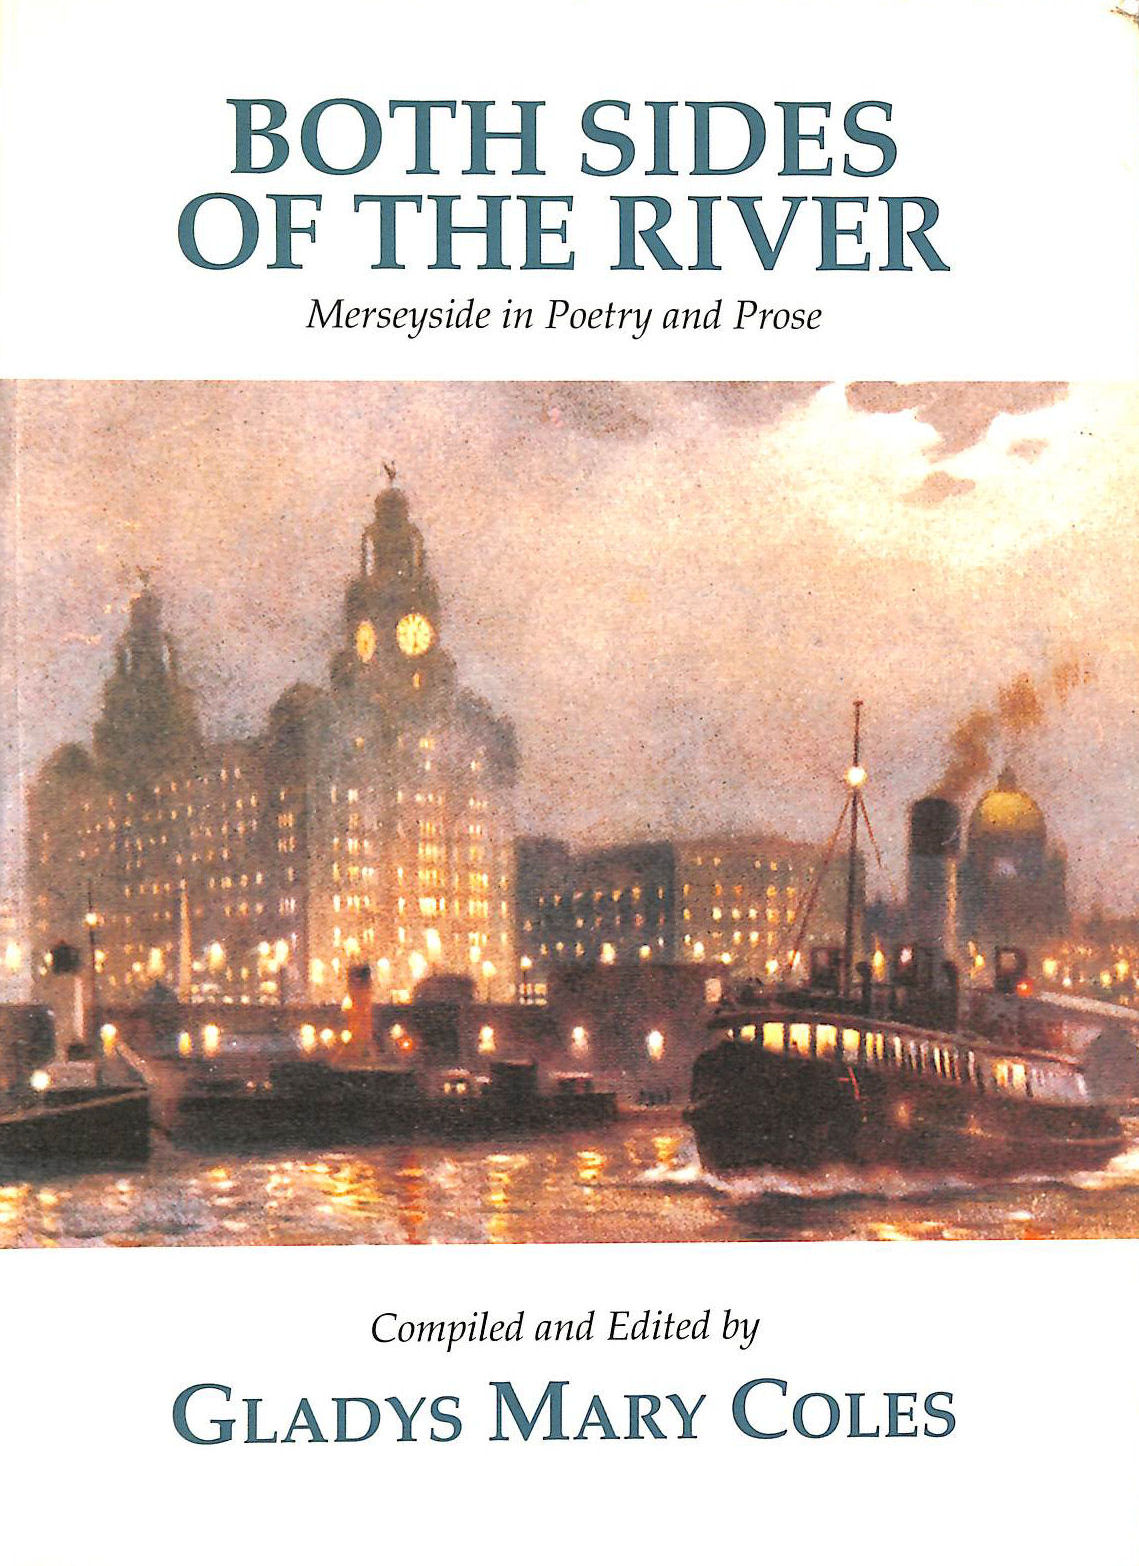 COLES, GLADYS MARY - Both Sides Of The River: Merseyside In Poetry And Prose